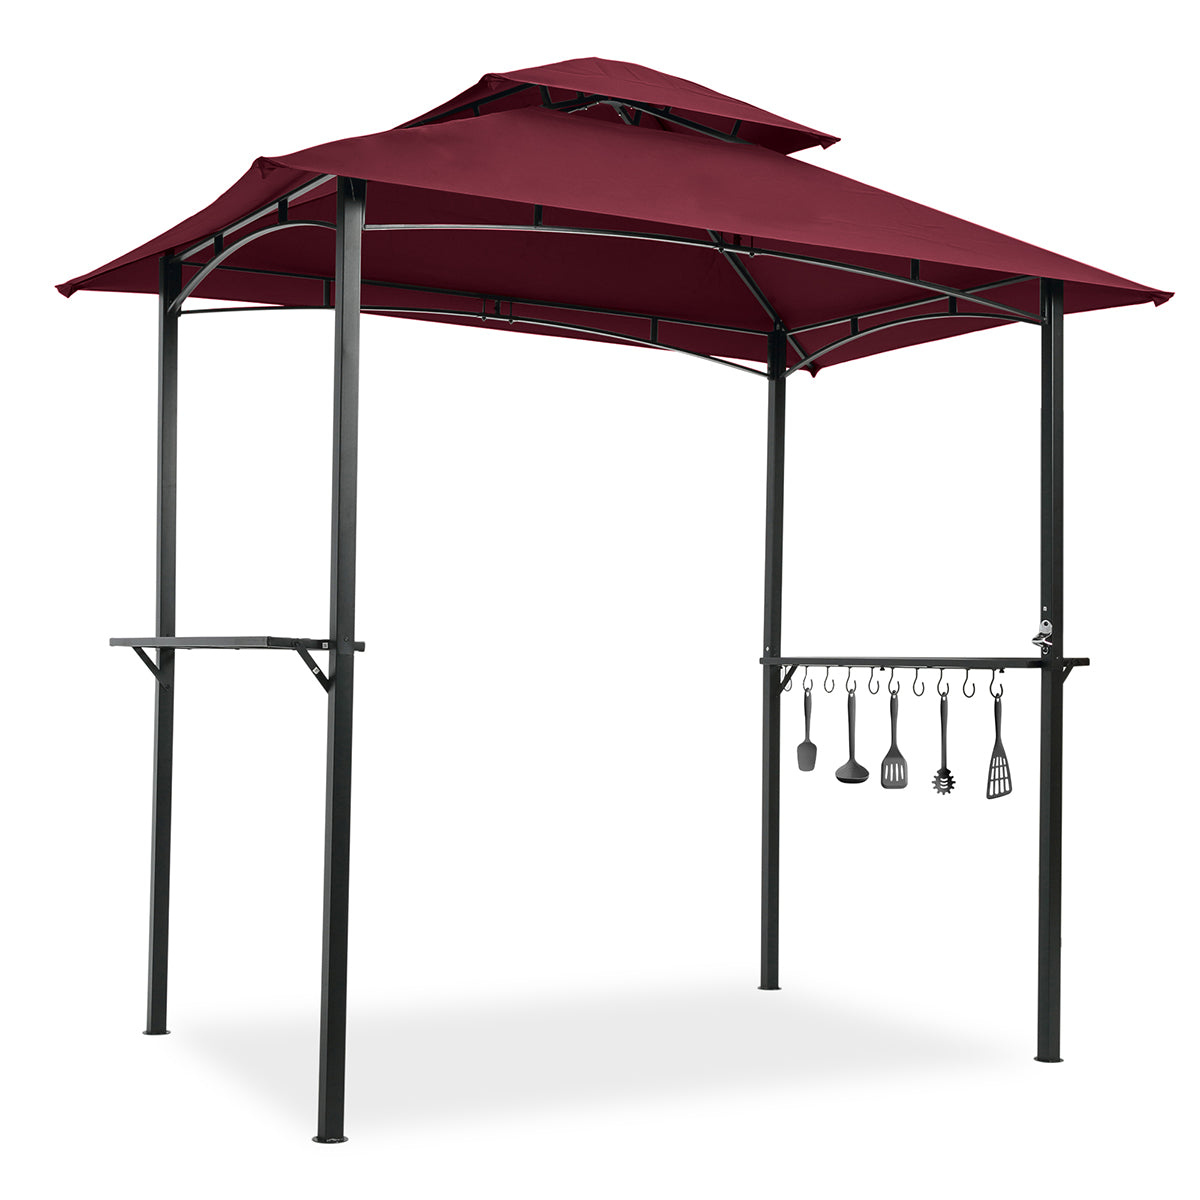 Outdoor Grill Gazebo 8 x 5 Ft, Shelter Tent, Double Tier Soft Top Canopy and Steel Frame with hook and Bar Counters, - Burgundy-Boyel Living